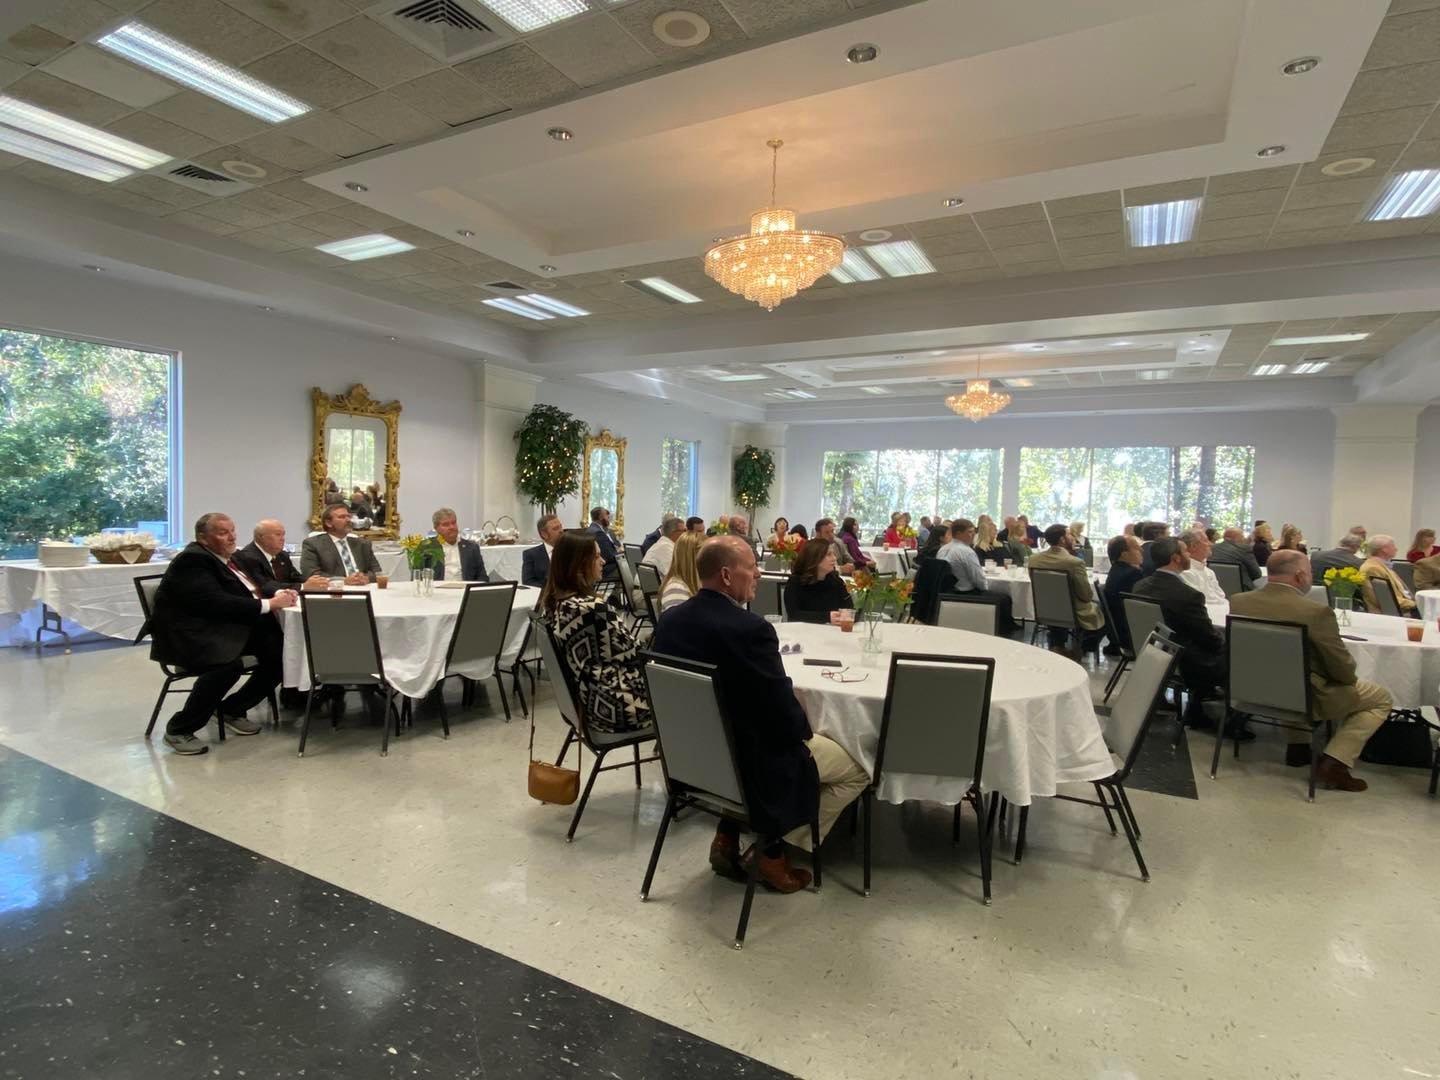 Eastern Shore Chamber of Commerce members and area elected representatives met Tuesday, Nov. 30 for the chamber’s annual Elected Officials Luncheon at the James Nix Center in Fairhope.